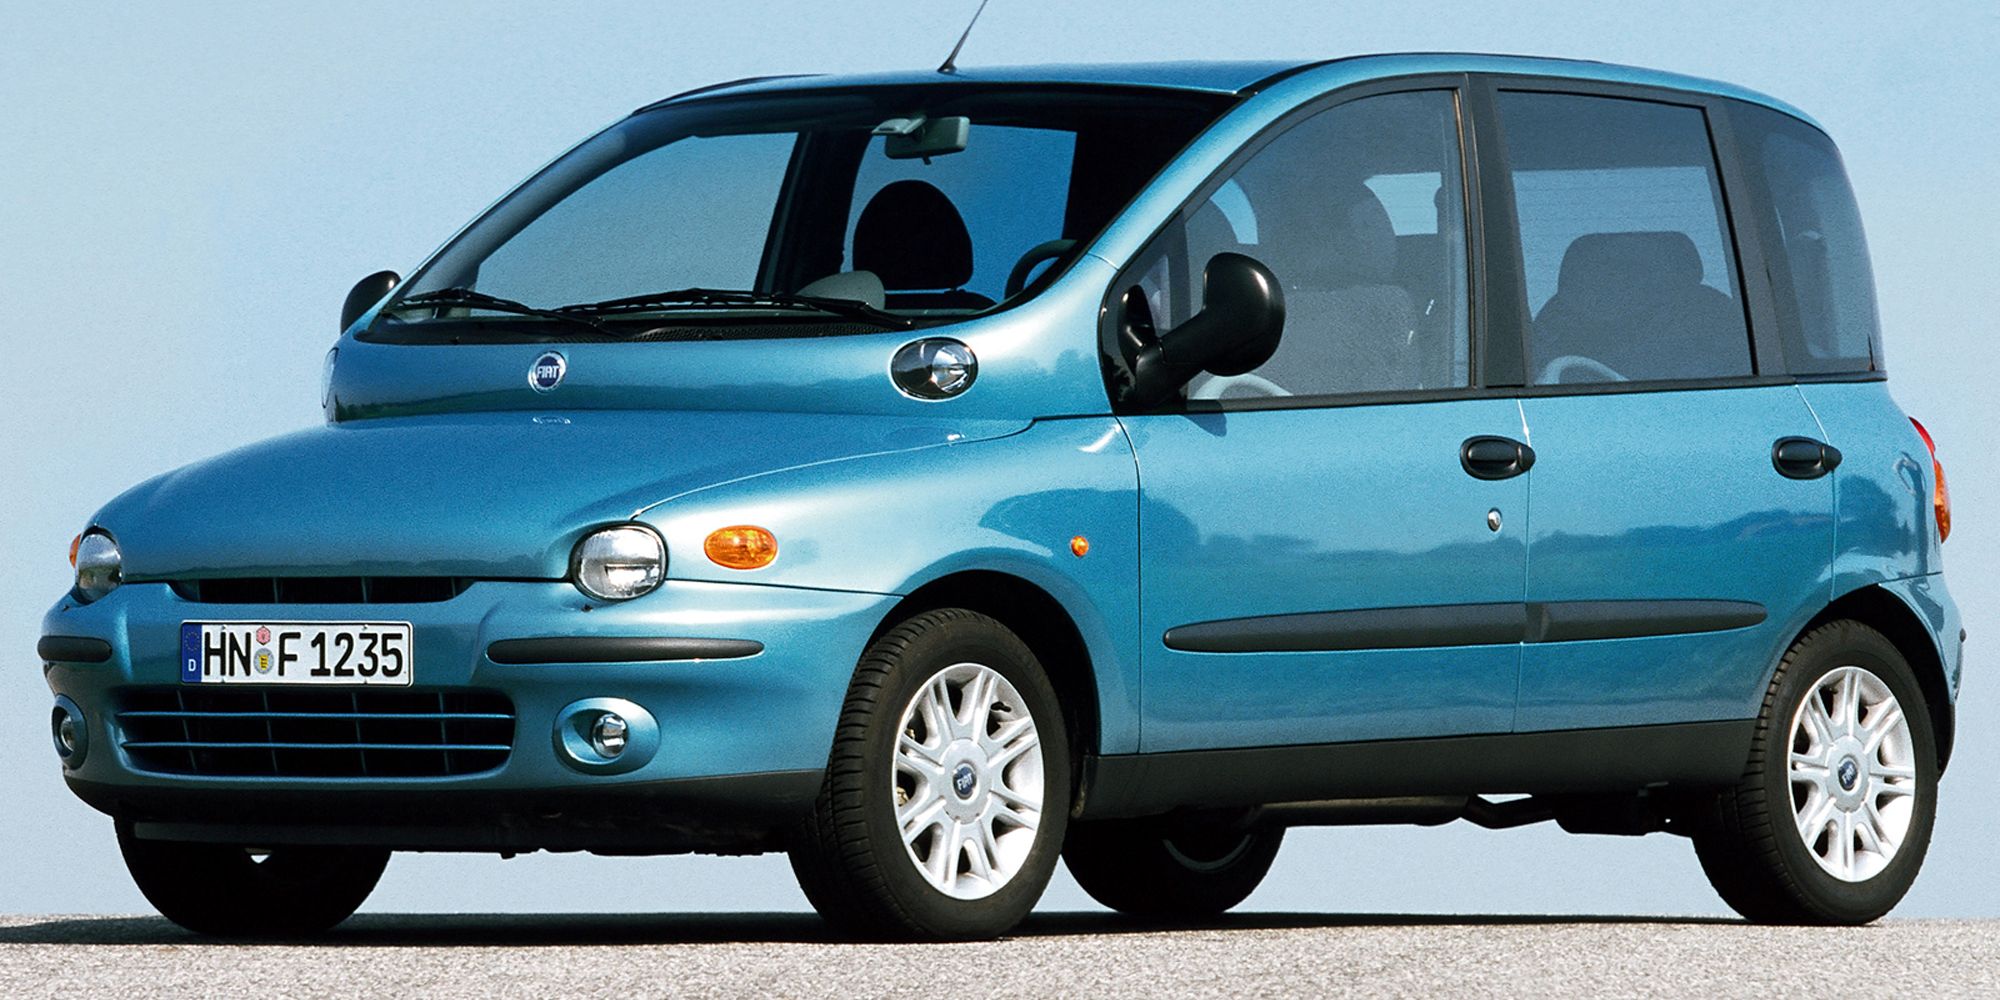 Front 3/4 view of a teal Multipla